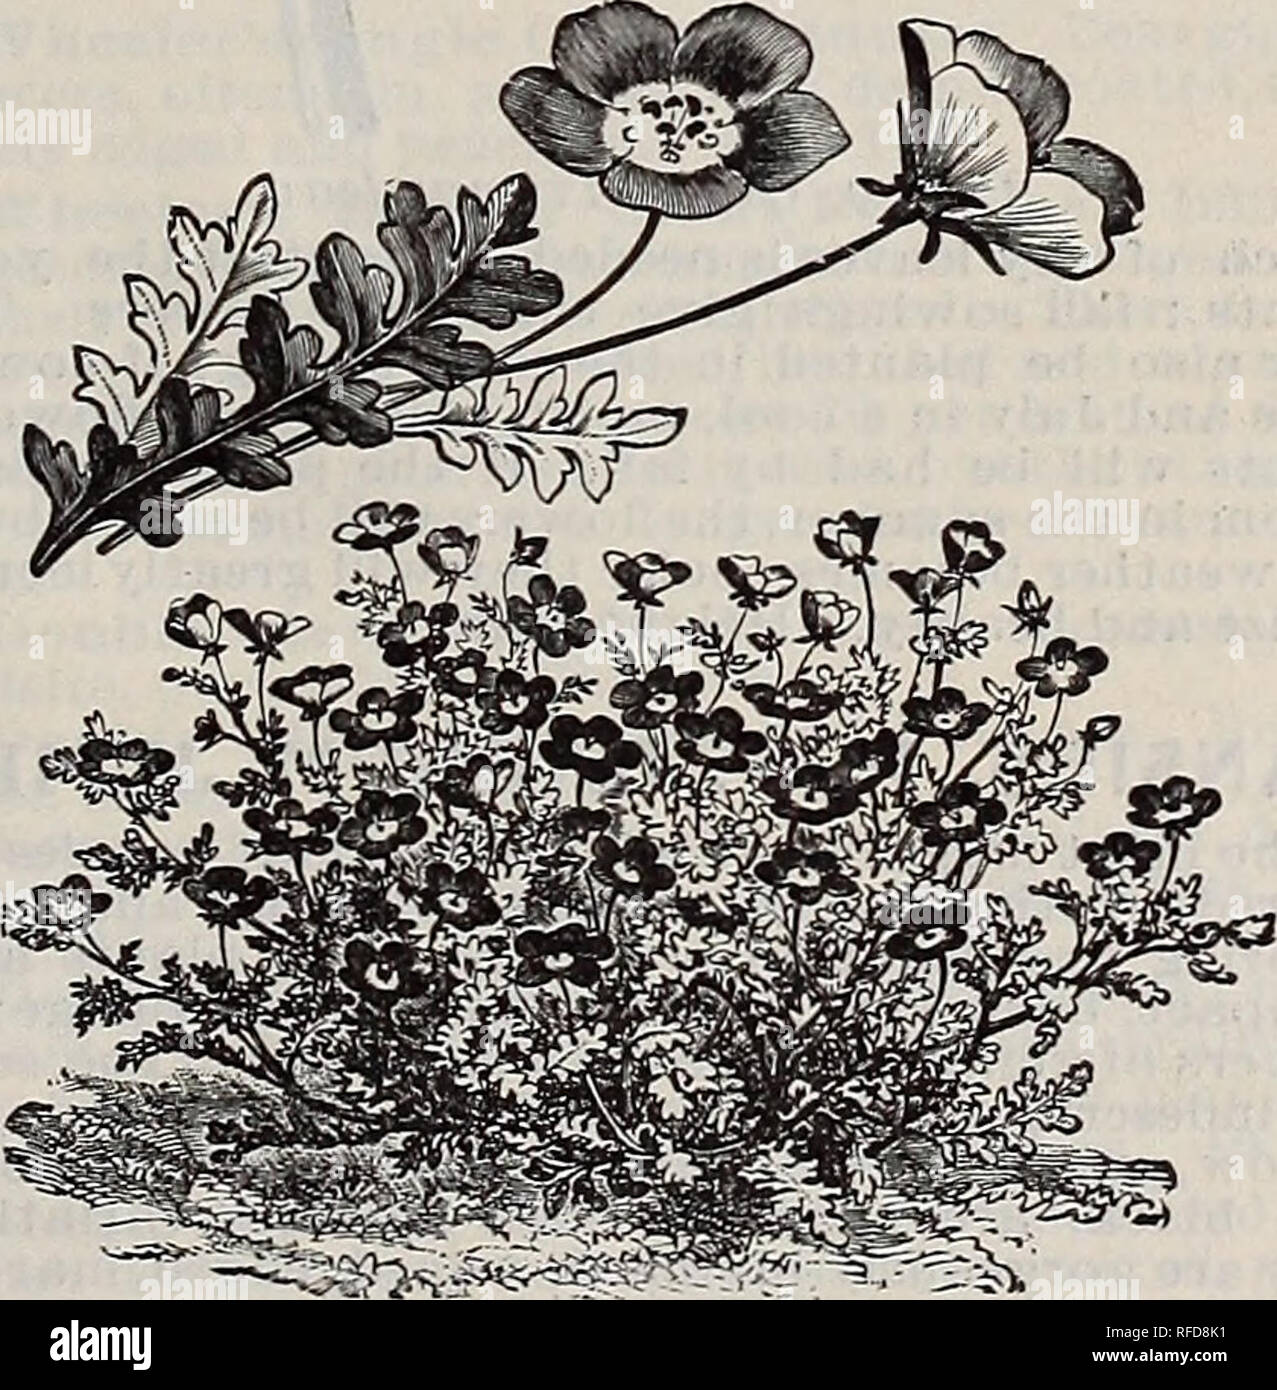 . Wheeler's seeds, bulbs and plants are the best that grow, 1902. Nursery stock Connecticut Catalogs; Vegetables Seeds Catalogs; Flowers Seeds Catalogs; Agricultural implements Catalogs. Nigella Damascena. NICOTIAN A. (h.h.a.2,3). Handsome decorative plants of the tobacco family. Alfinis. Pure white, star-shaped, sweet-scented flowers. A continuous bloomer. Pkt. 5c. Colossea. A grand decorative plant of tropical ap- pearance, gigantic leaves, at first a rose color, chang- ing to deep green, with red veins. 5 to 6 ft. Pkt. 10c. Sylvestris. Handsome, large-leaved, ornamental plants; the pure whi Stock Photo